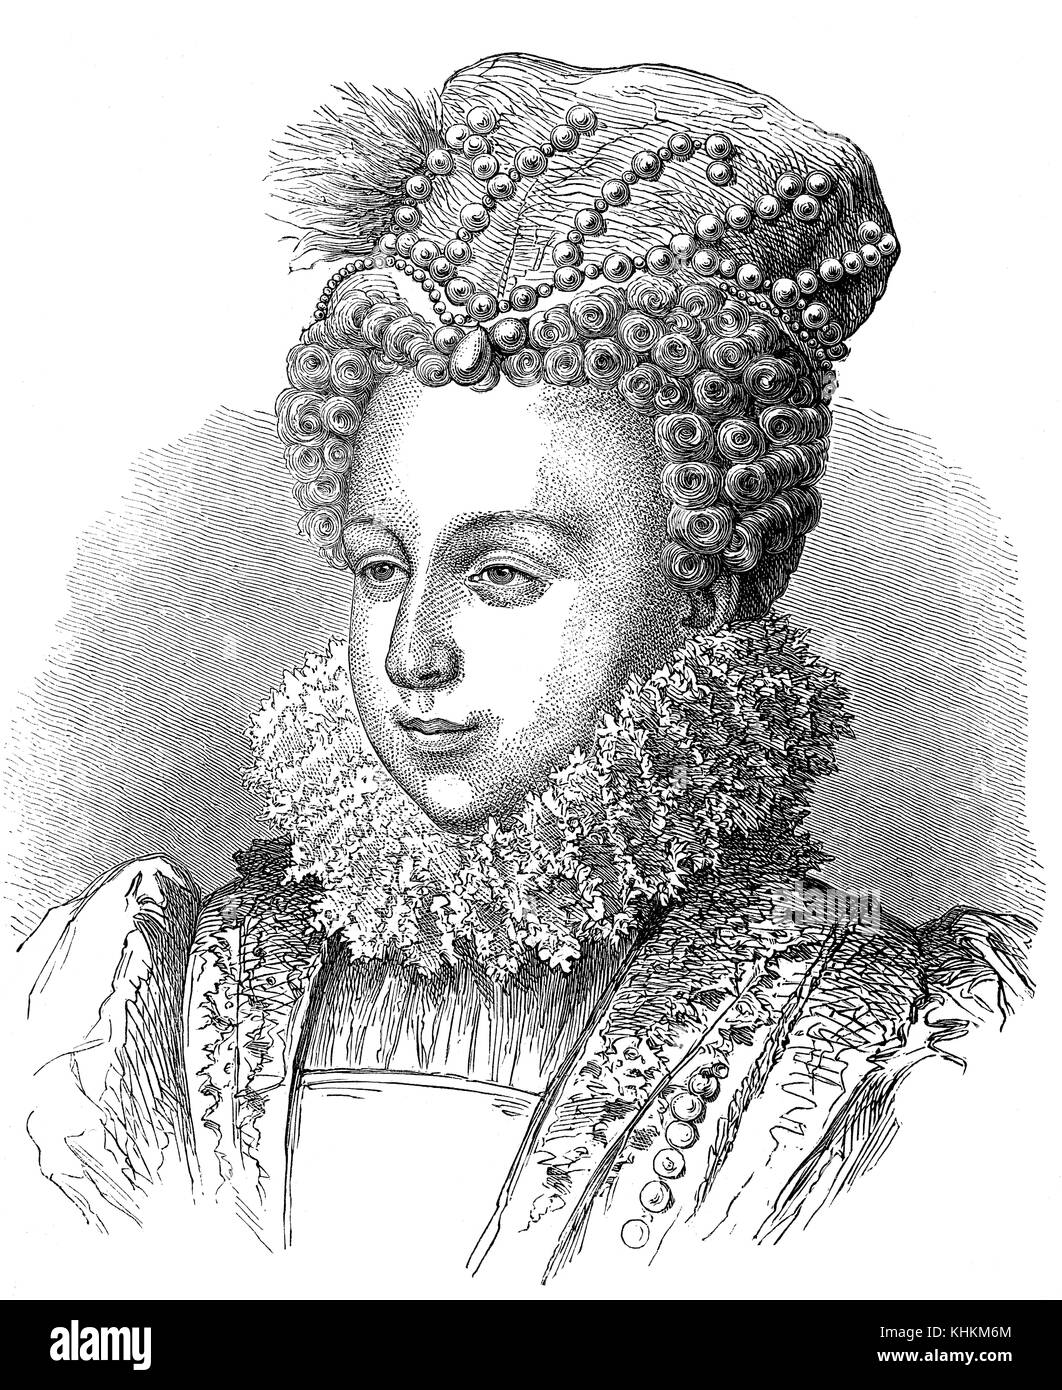 Margaret  of Valois, 1553 – 1615, a French princess of the Valois dynasty, queen consort of Navarre and France Stock Photo